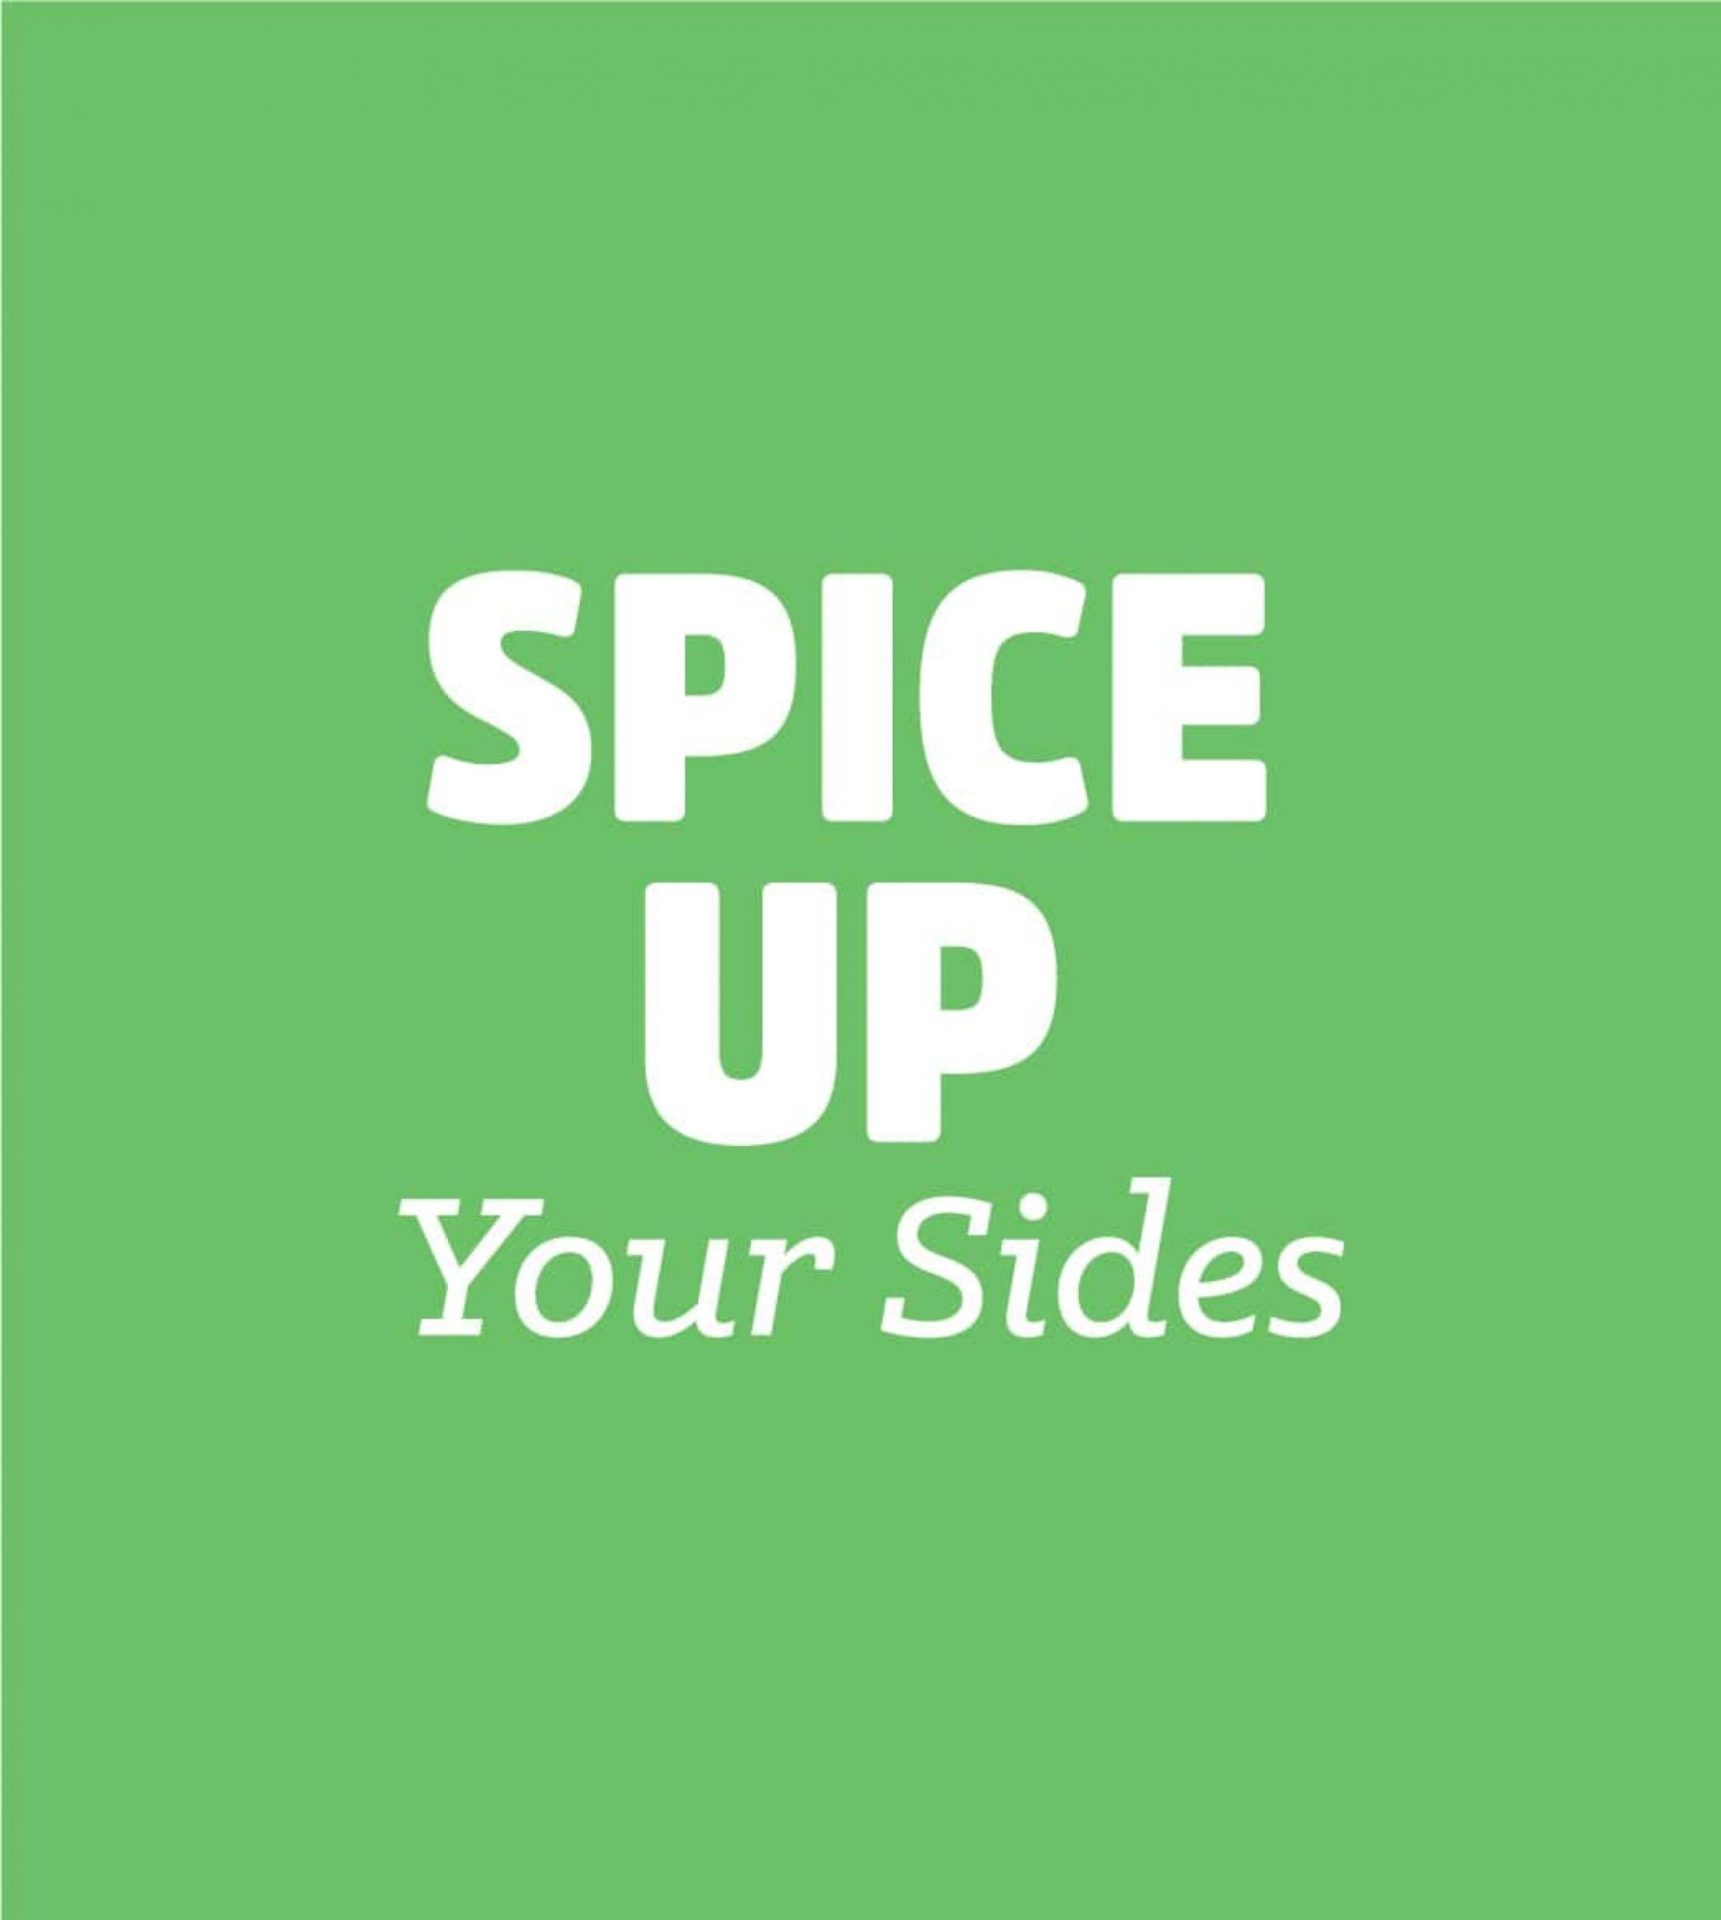 SPICE UP Your Sides